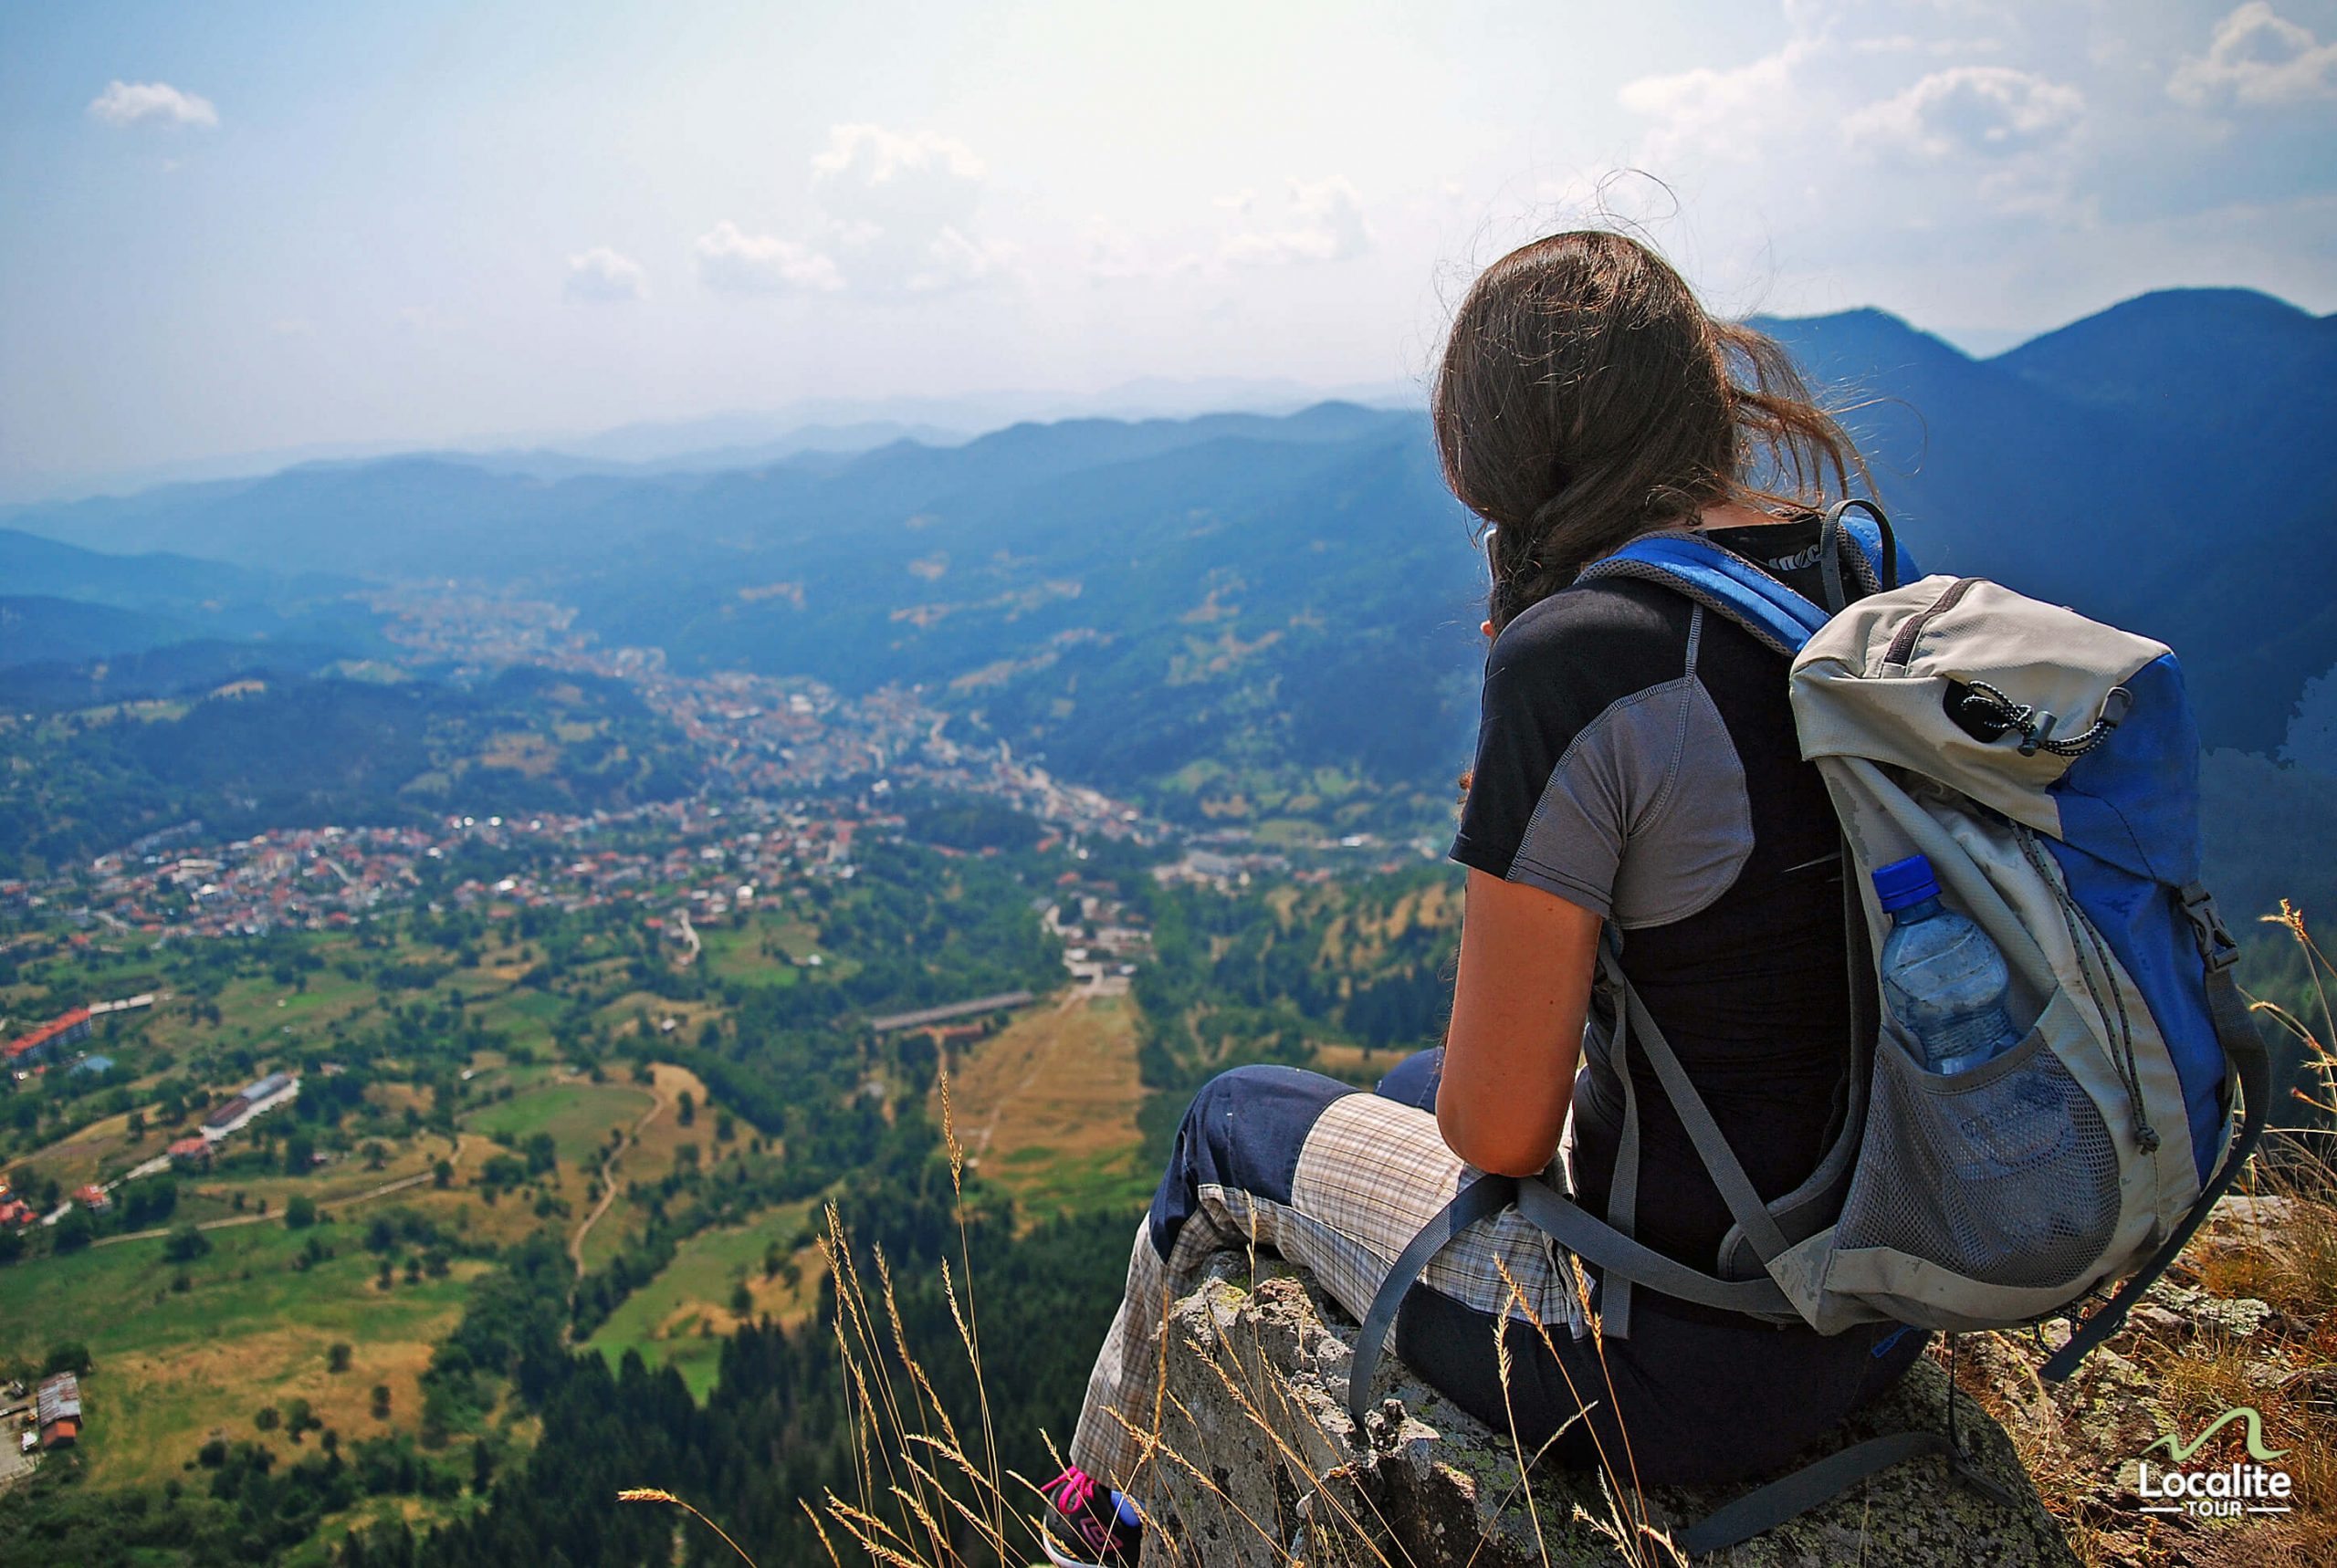 Girl in hiking outfit sitting on a rock enjoying the view in Rhodope mountains